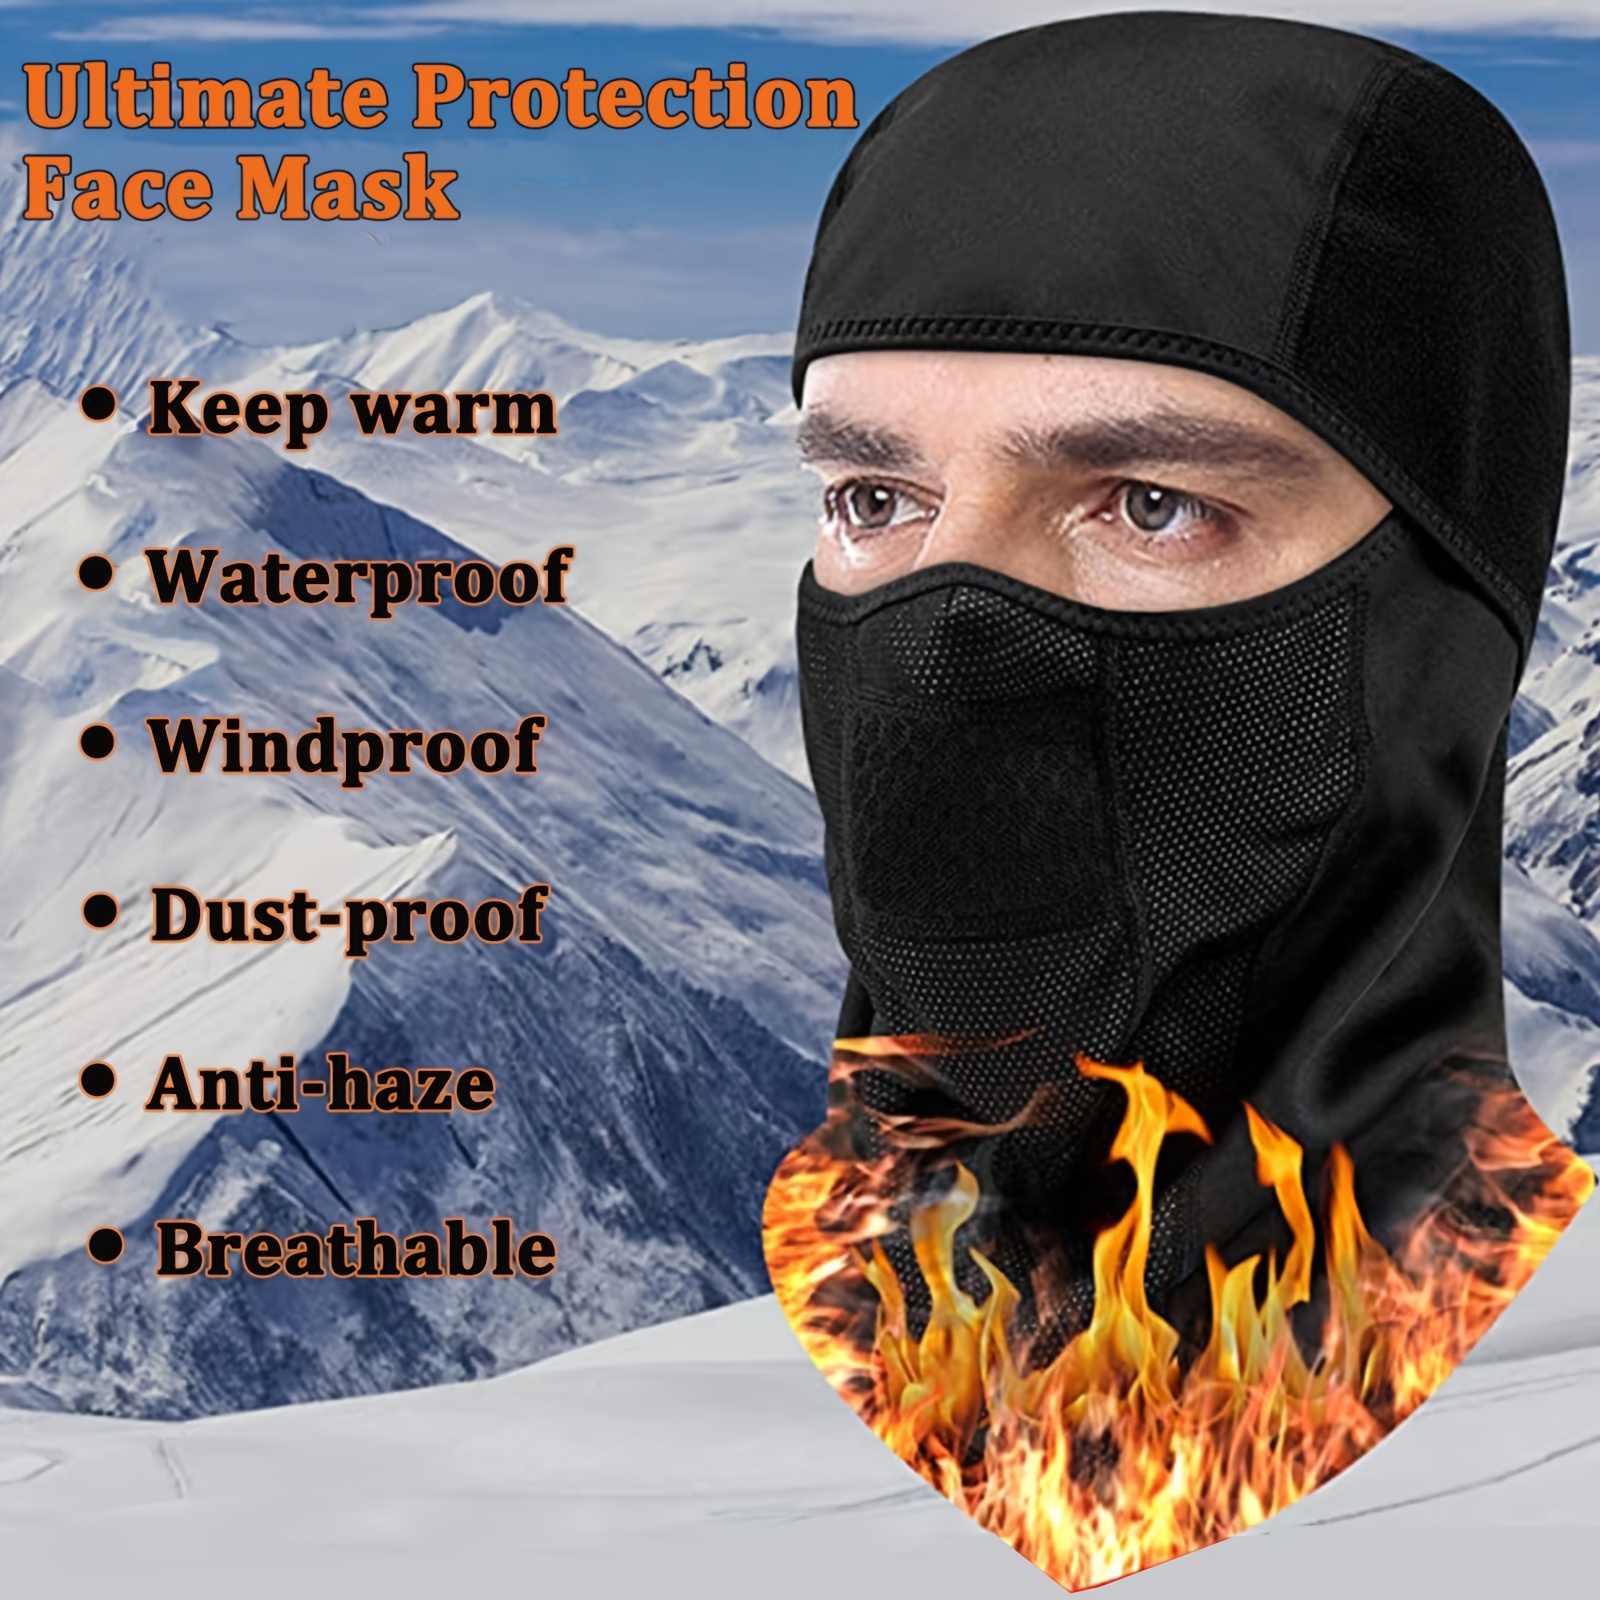 Balaclava Ski Mask - Cold Weather Face Mask for Men & Women - Windproof  Hood Snow Gear for Motorcycle Riding & Winter Sports